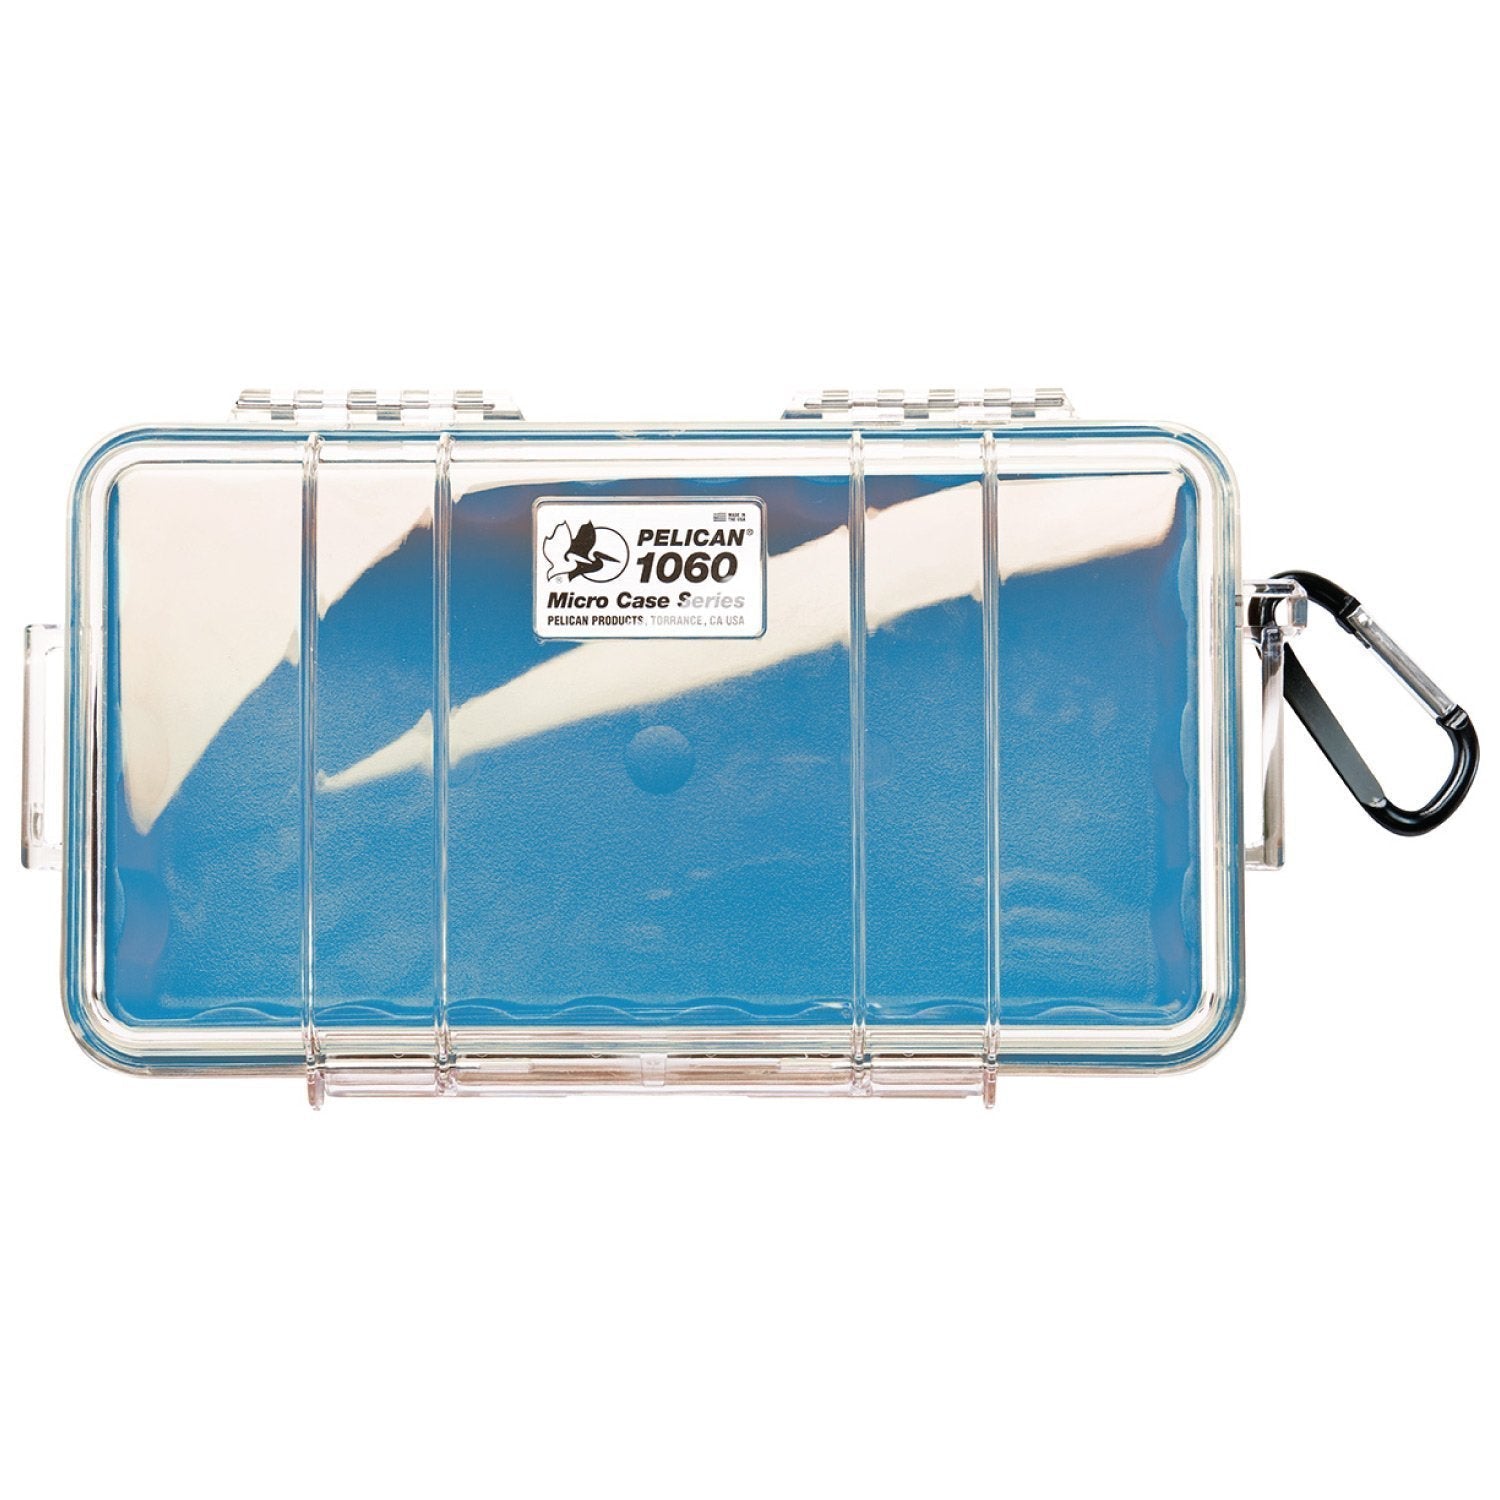 Pelican 1060 Micro Case Cases Pelican Products Clear Shell with Blue Liner Tactical Gear Supplier Tactical Distributors Australia